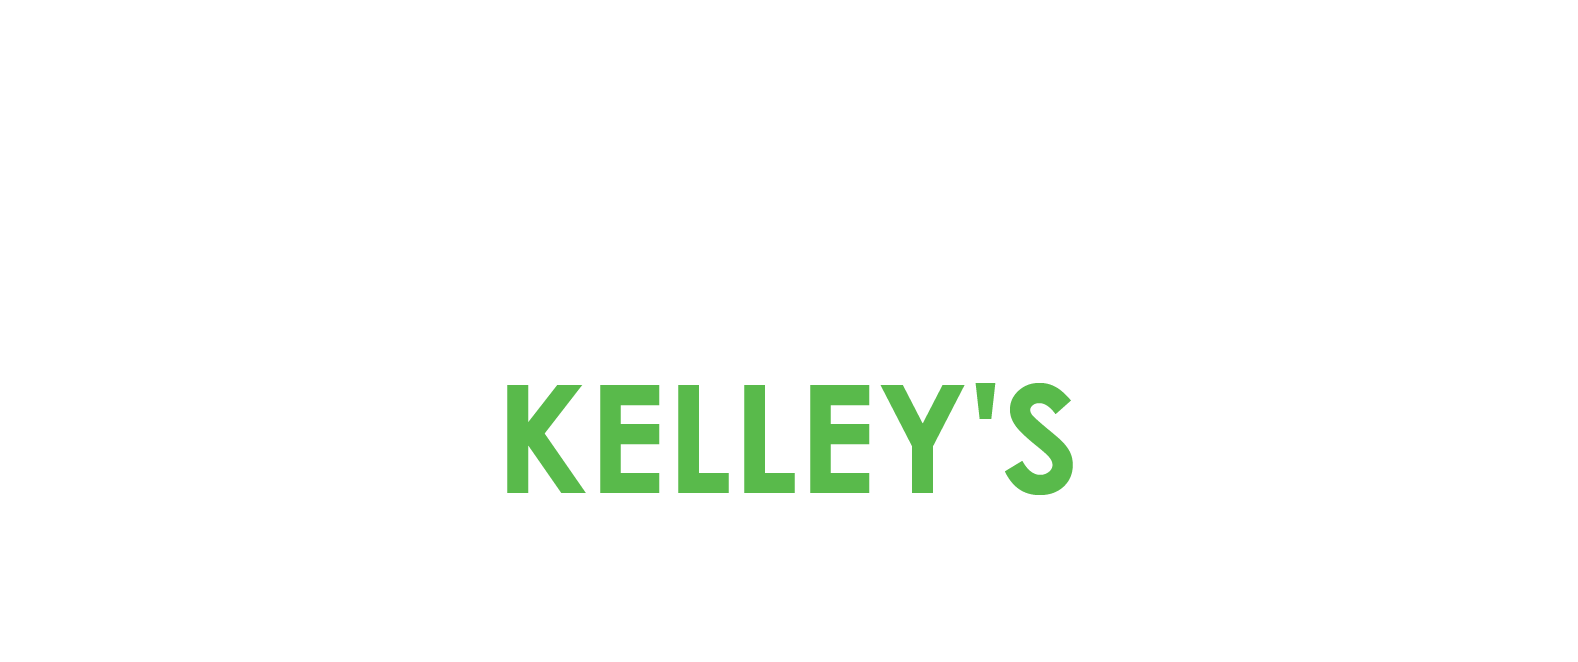 Kelley Dry Cleaning services limited